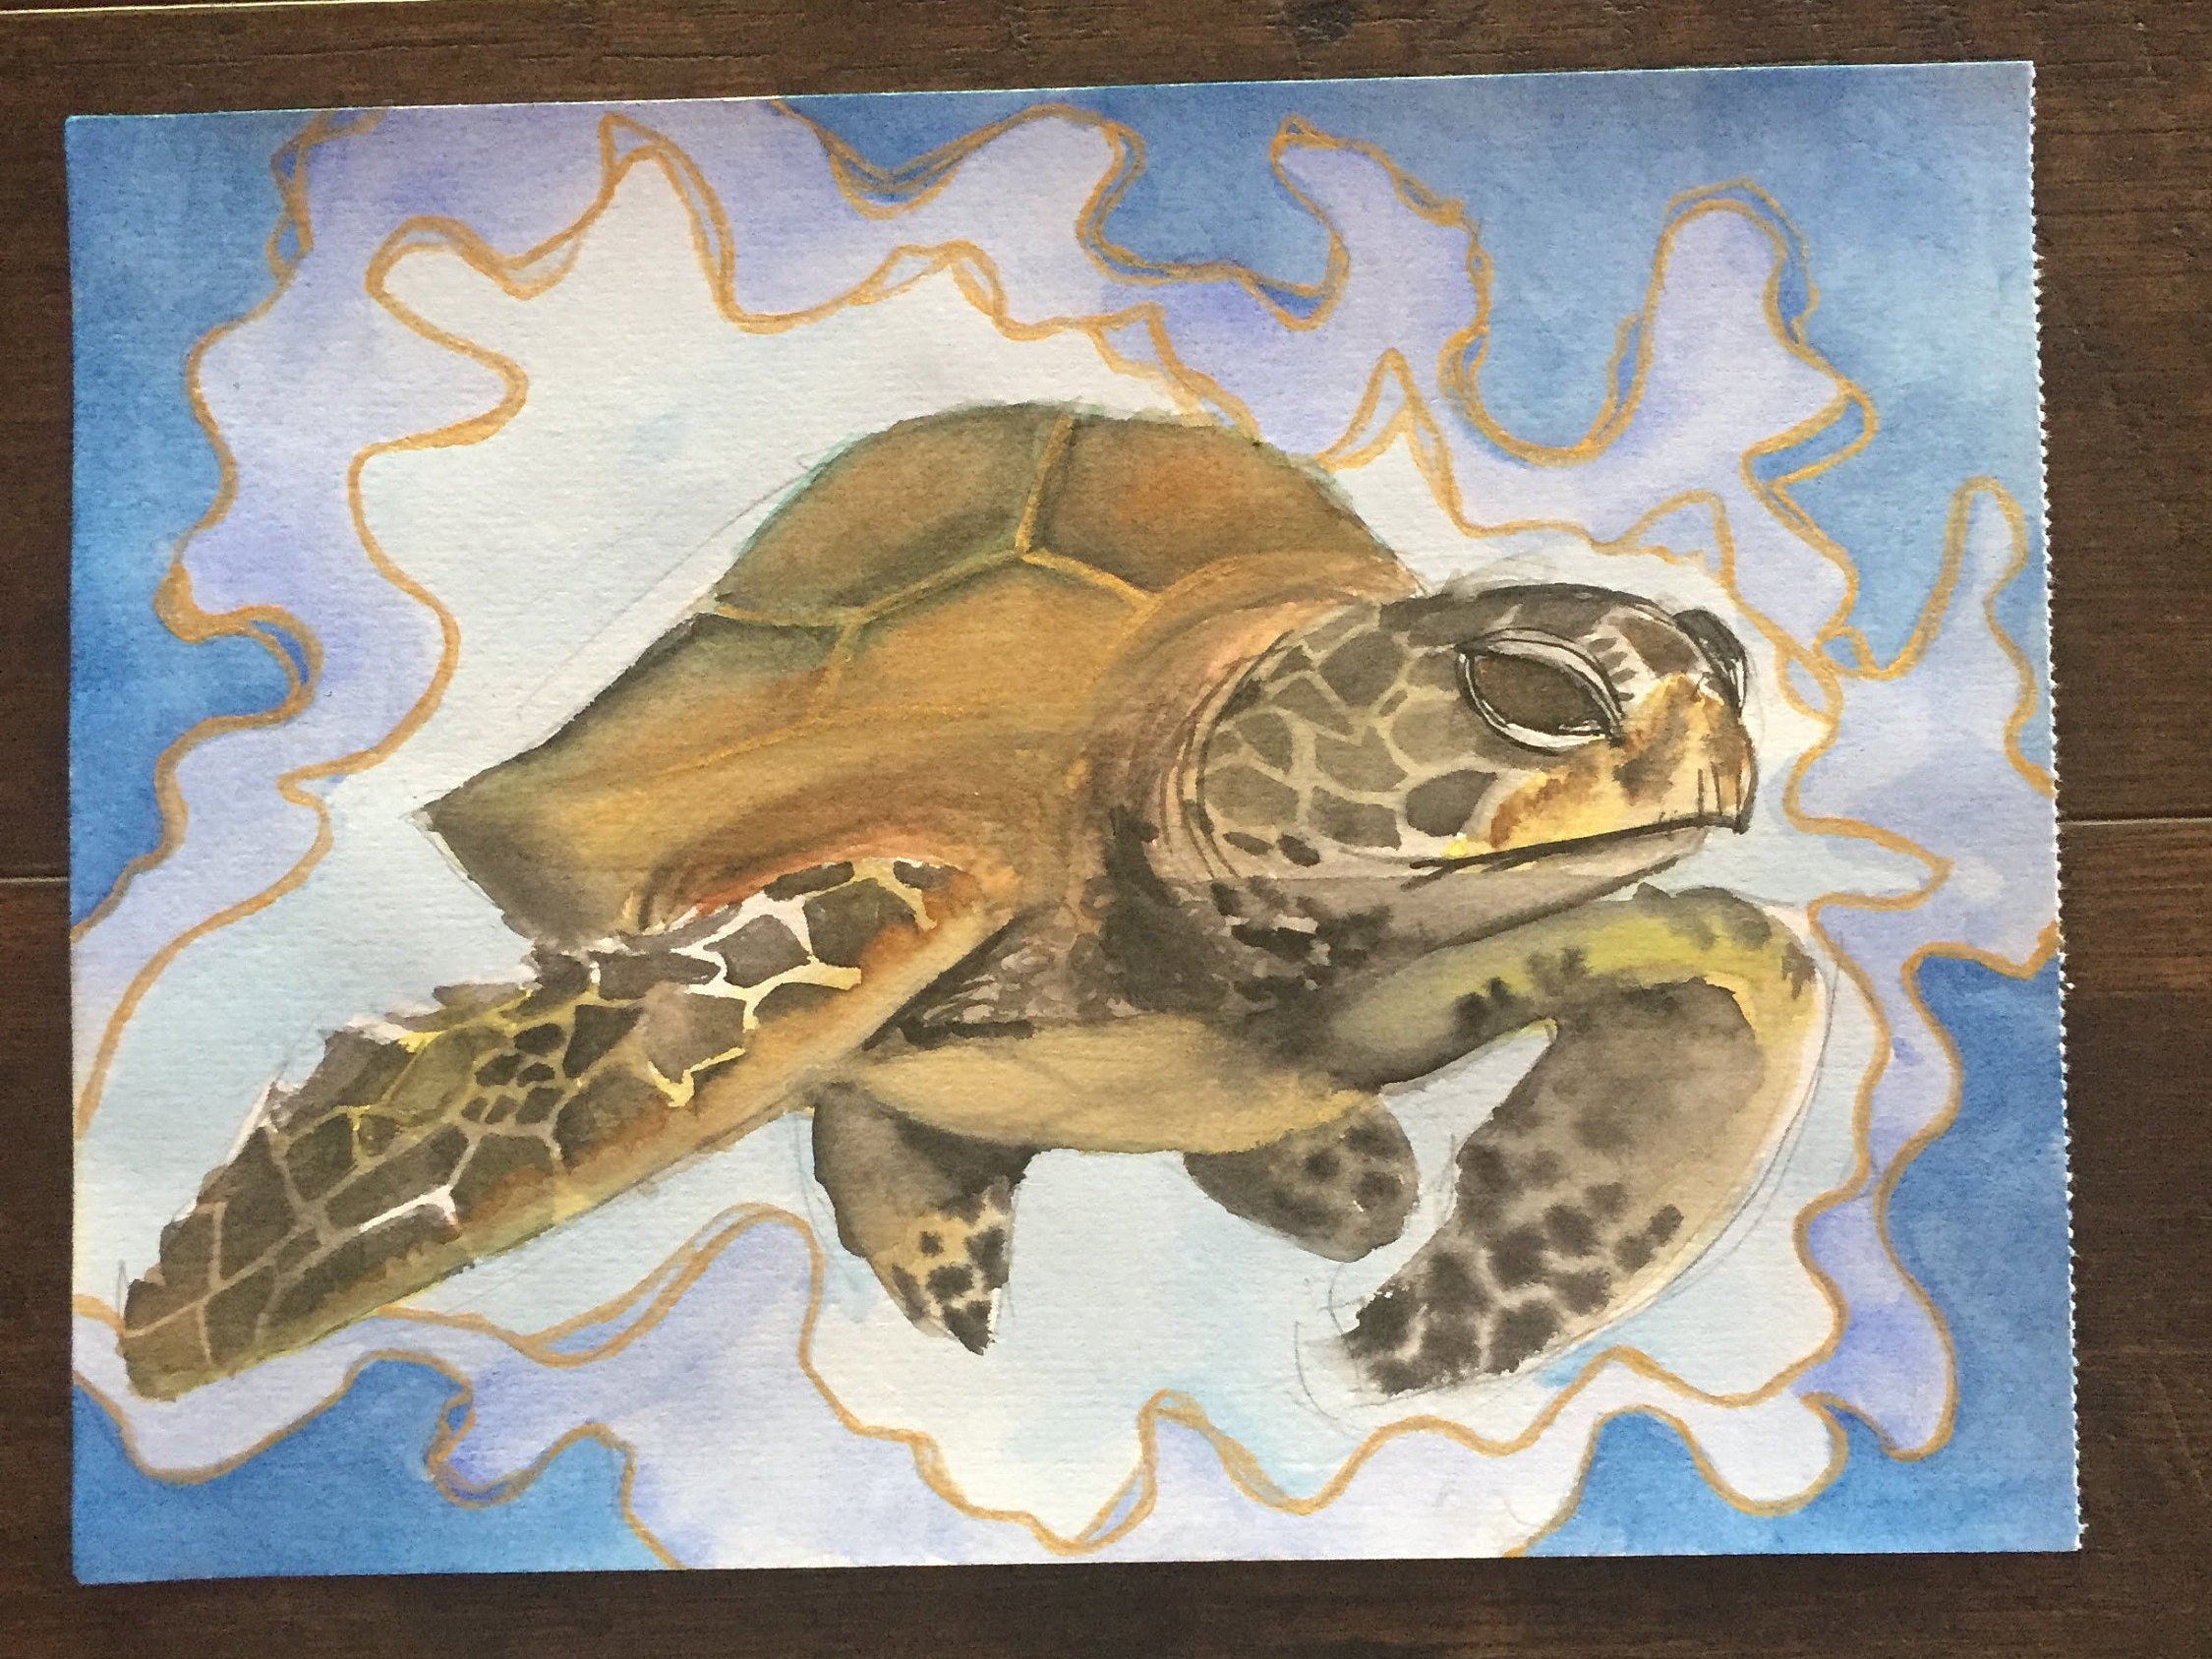 Snake and Turtle Watercolour pieces | Etsy